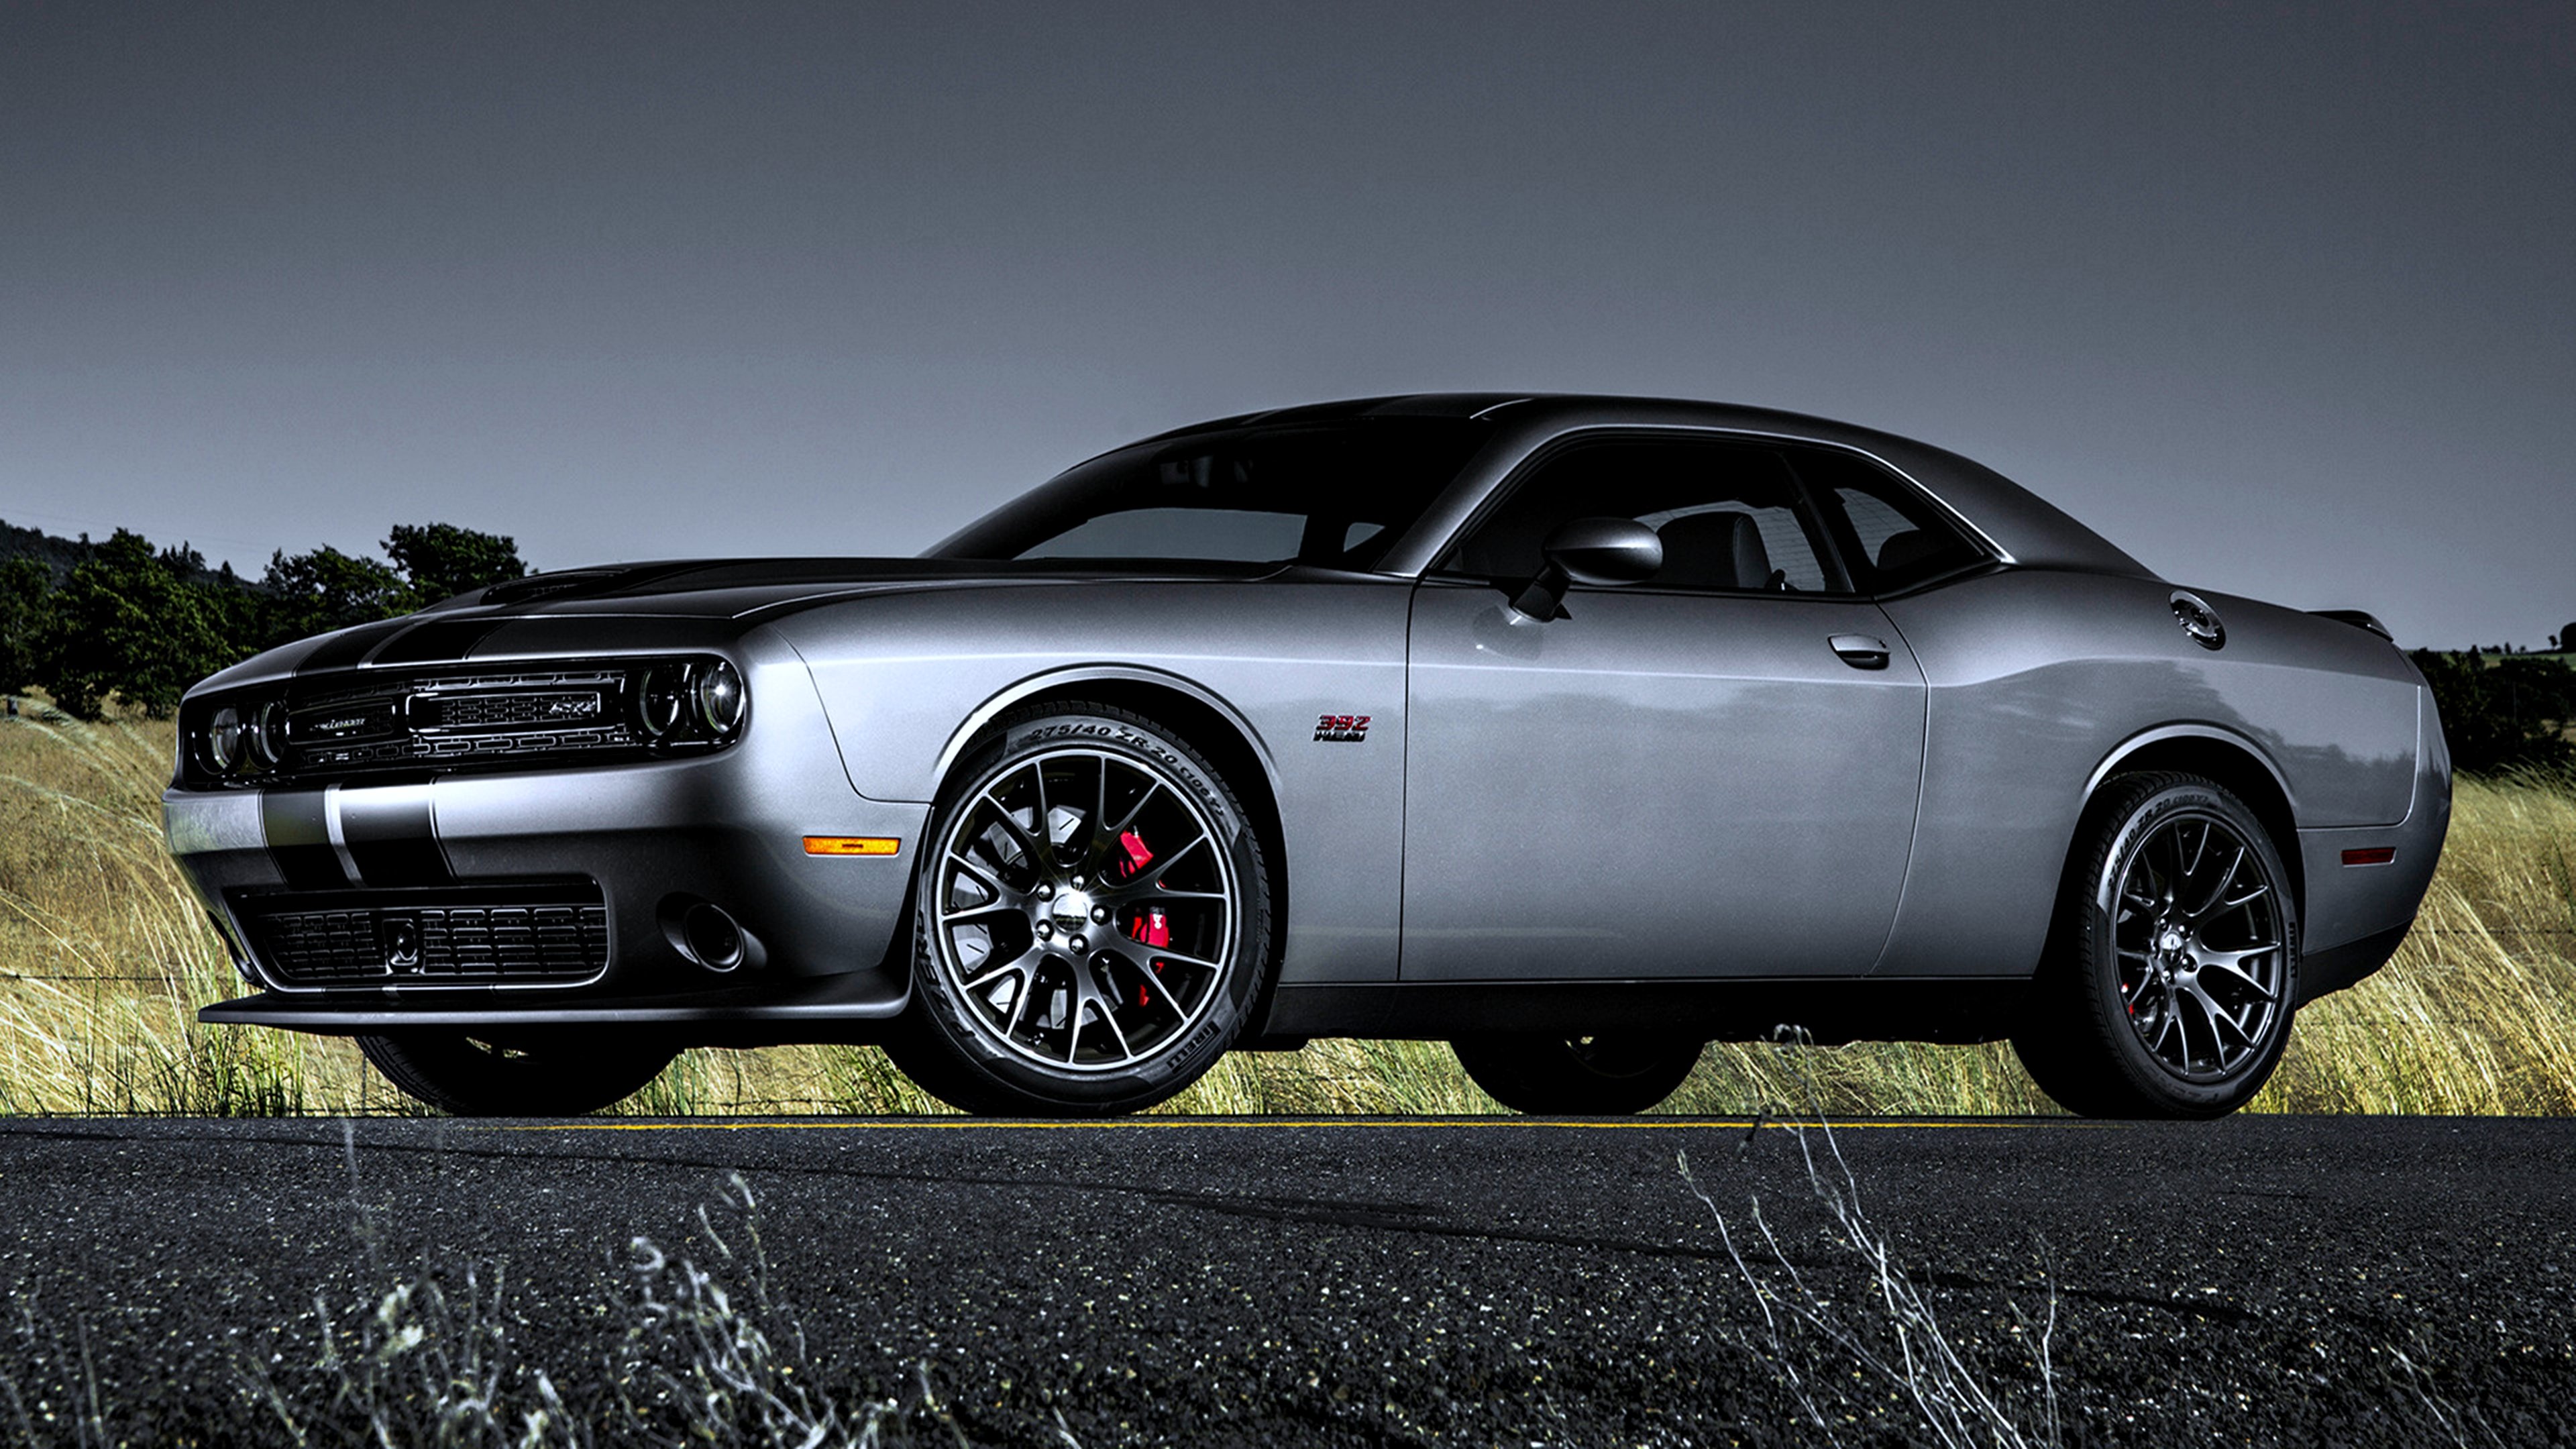 2015 Dodge Challenger SRT 392 - Wallpapers and HD Images 